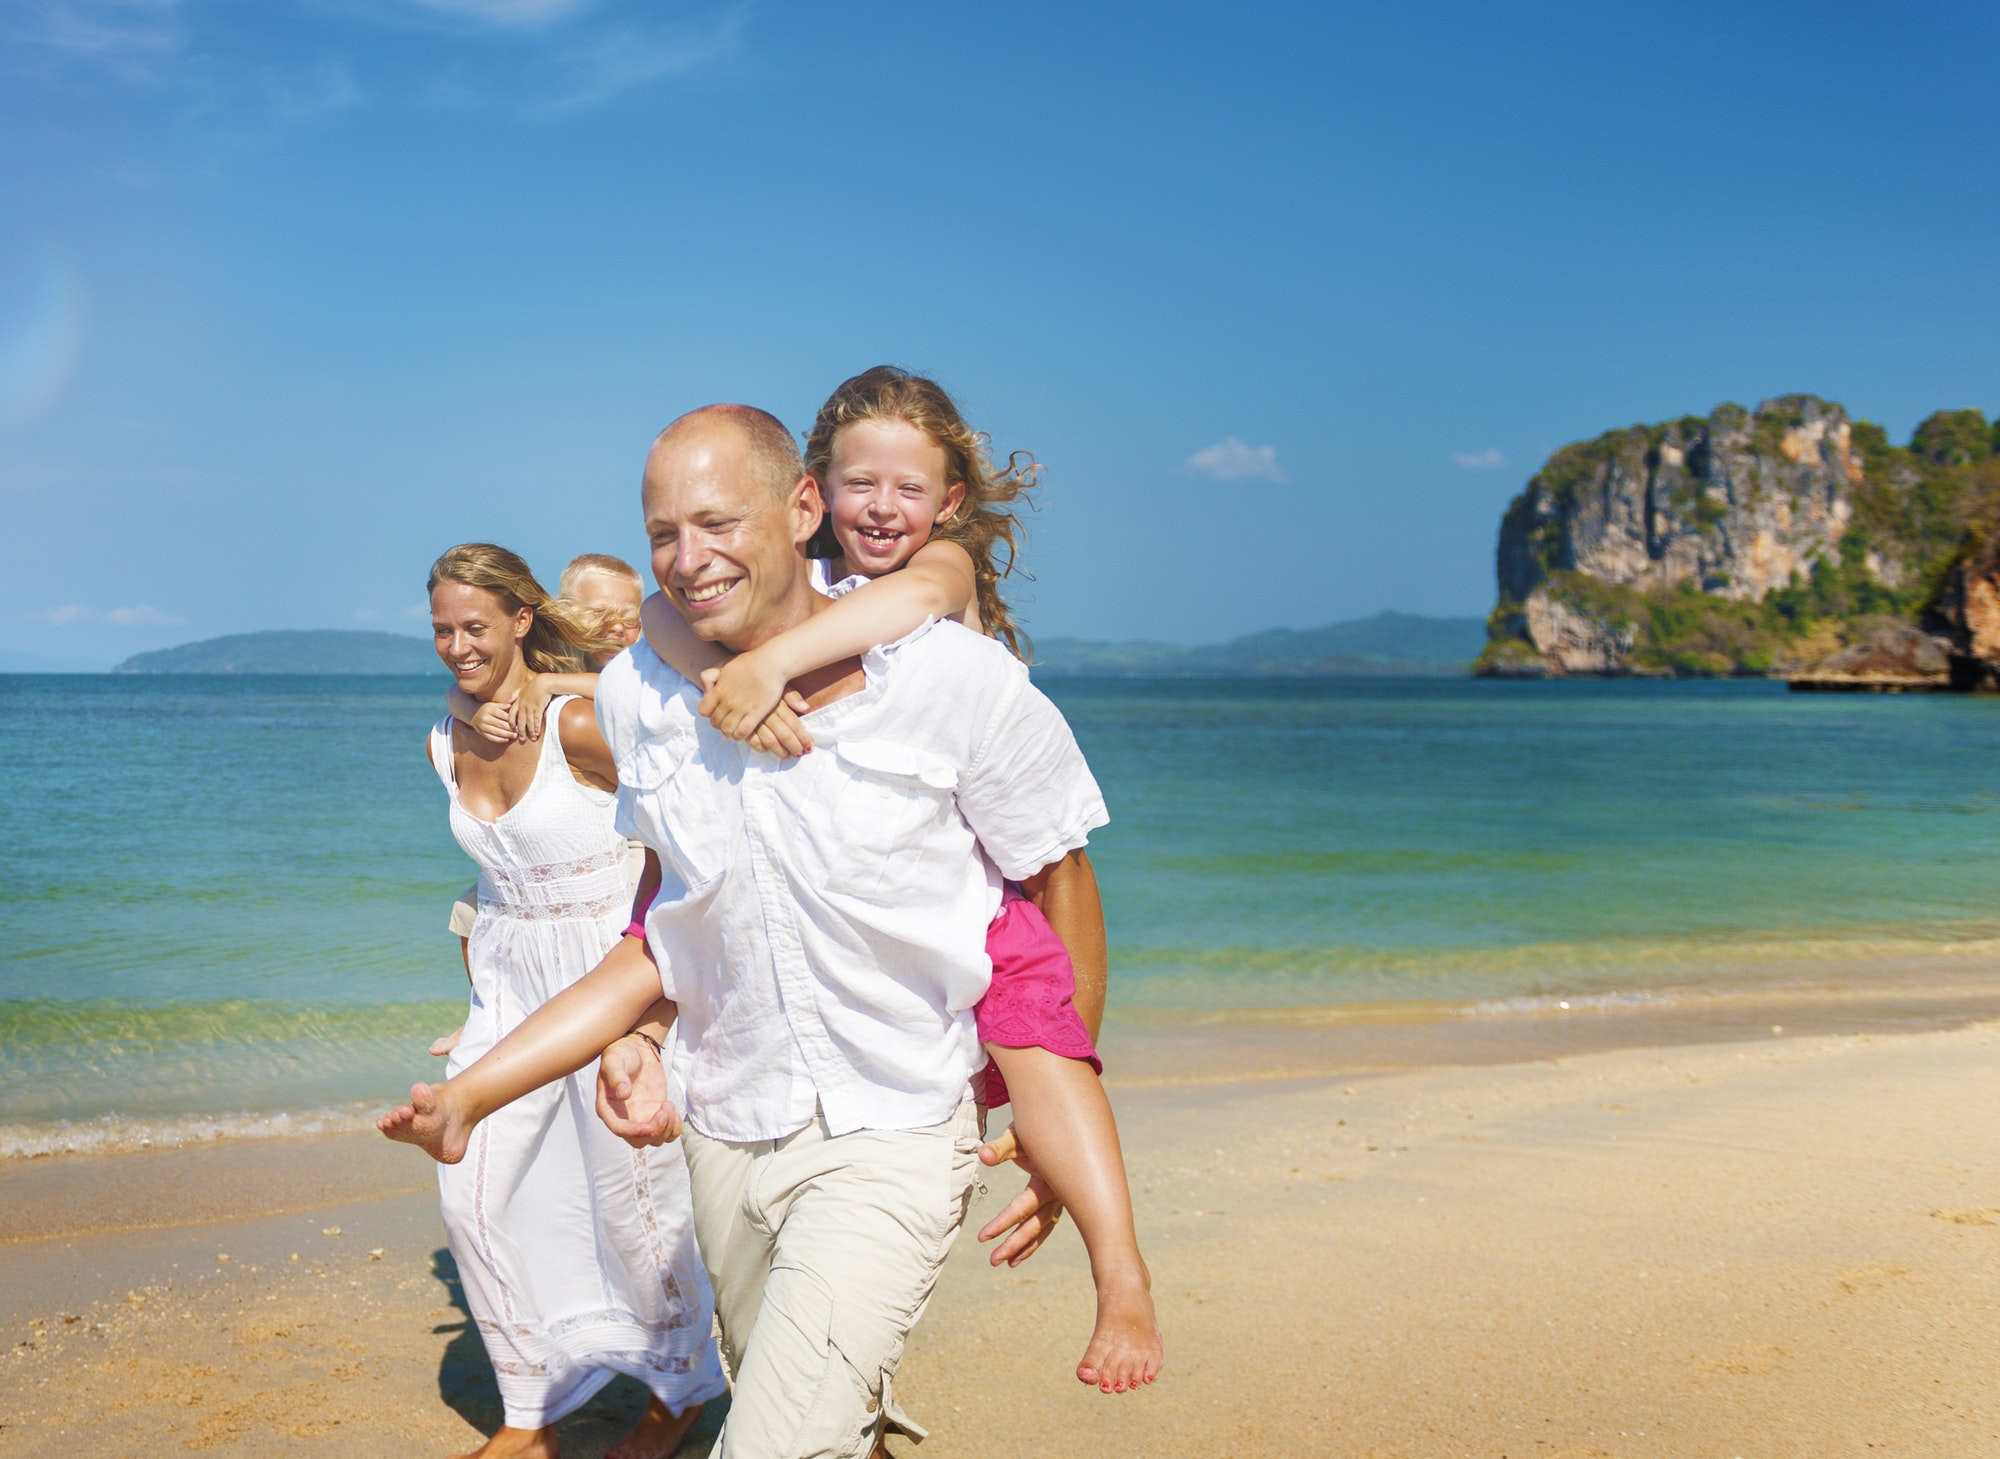 Beach Family Vacation Parent Children Relaxation Concept